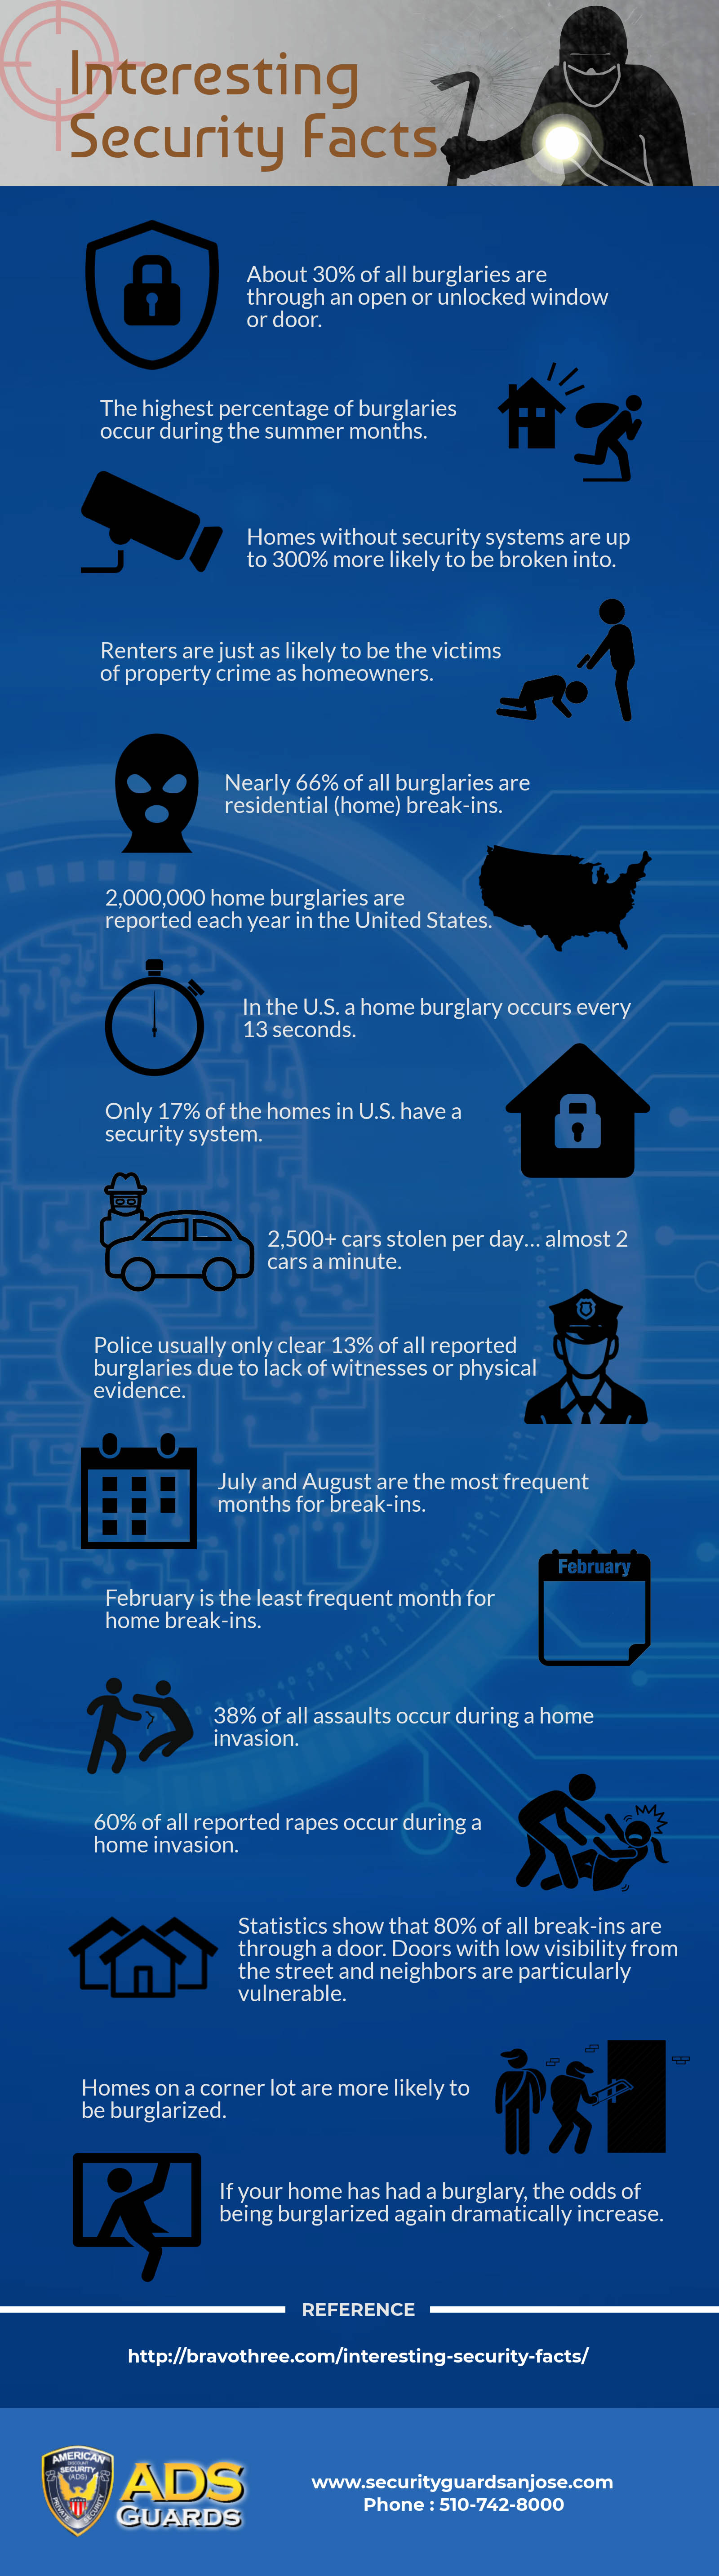 interesting security facts infographic